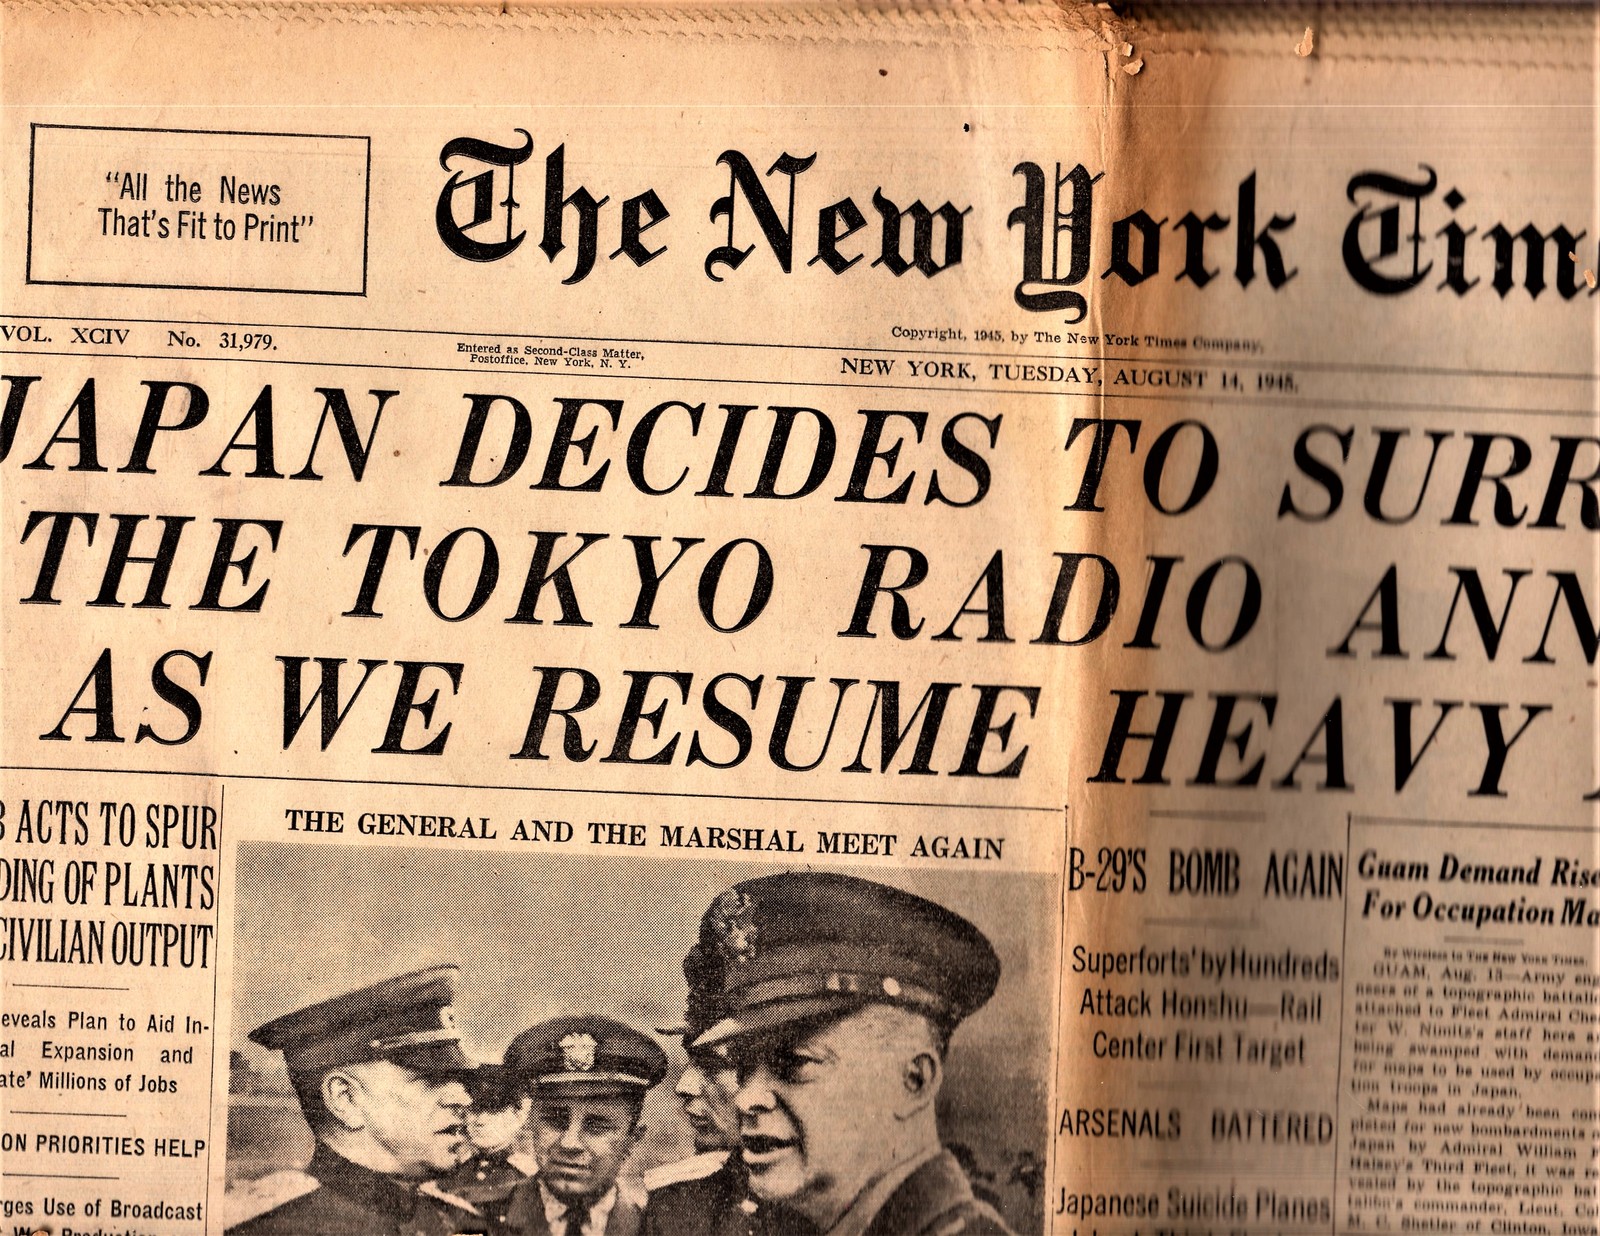 The New York Times Newspaper Tuesday August 14 1945 1940 69 